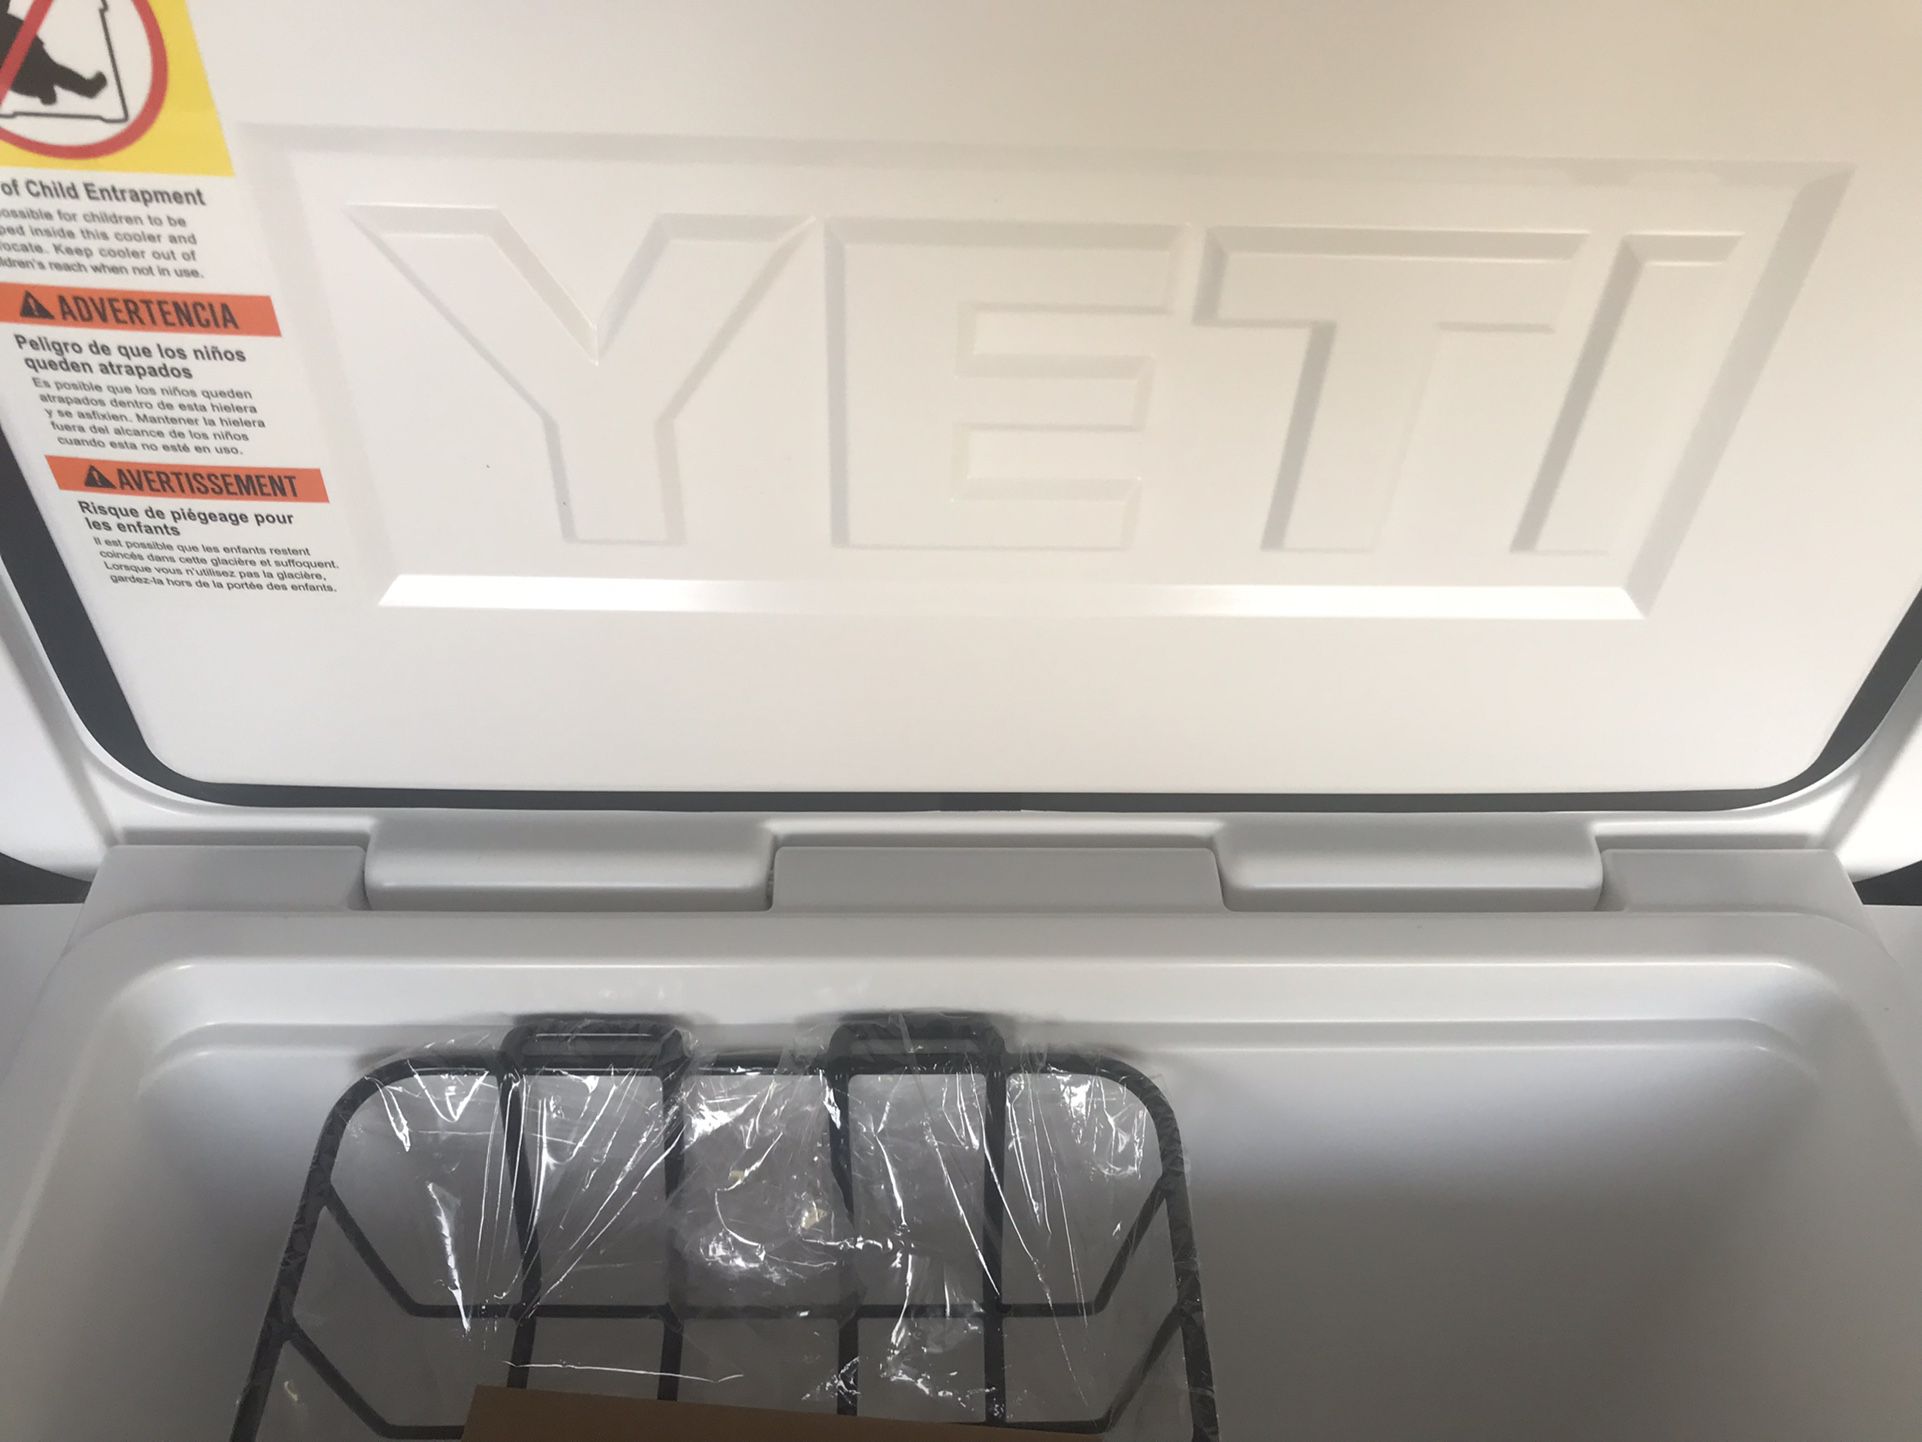 ***YETI 45 TUNDRA AQUIFER BLUE COOLER*** for Sale in Goldsboro, PA - OfferUp